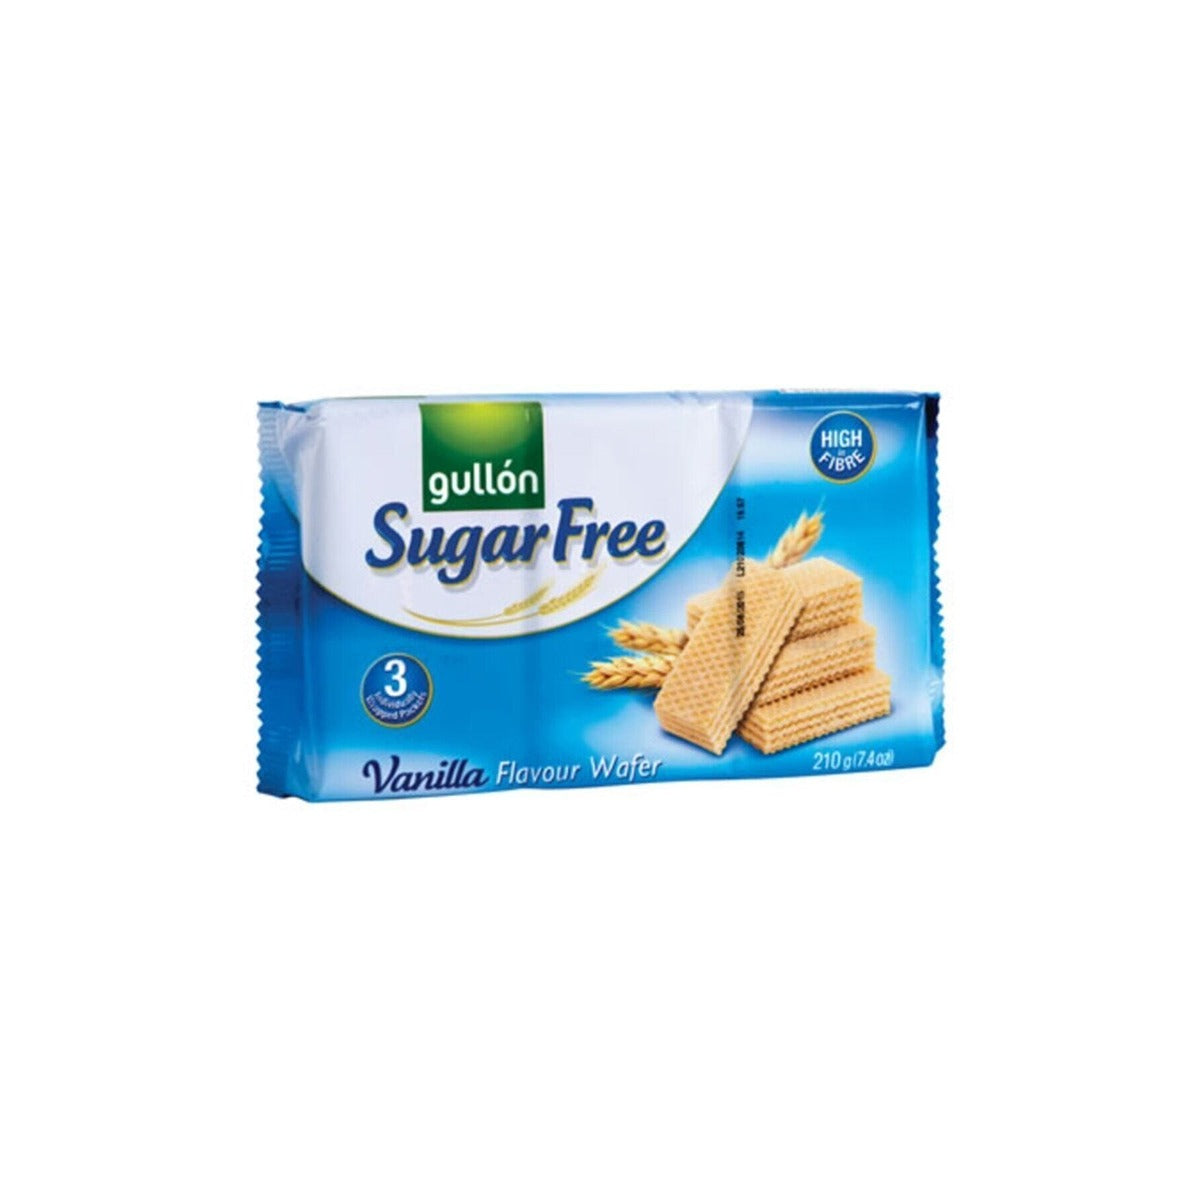 A box of Gullon - Sugar Free Vanilla Flavour Wafer Biscuits - 210g on a white background.